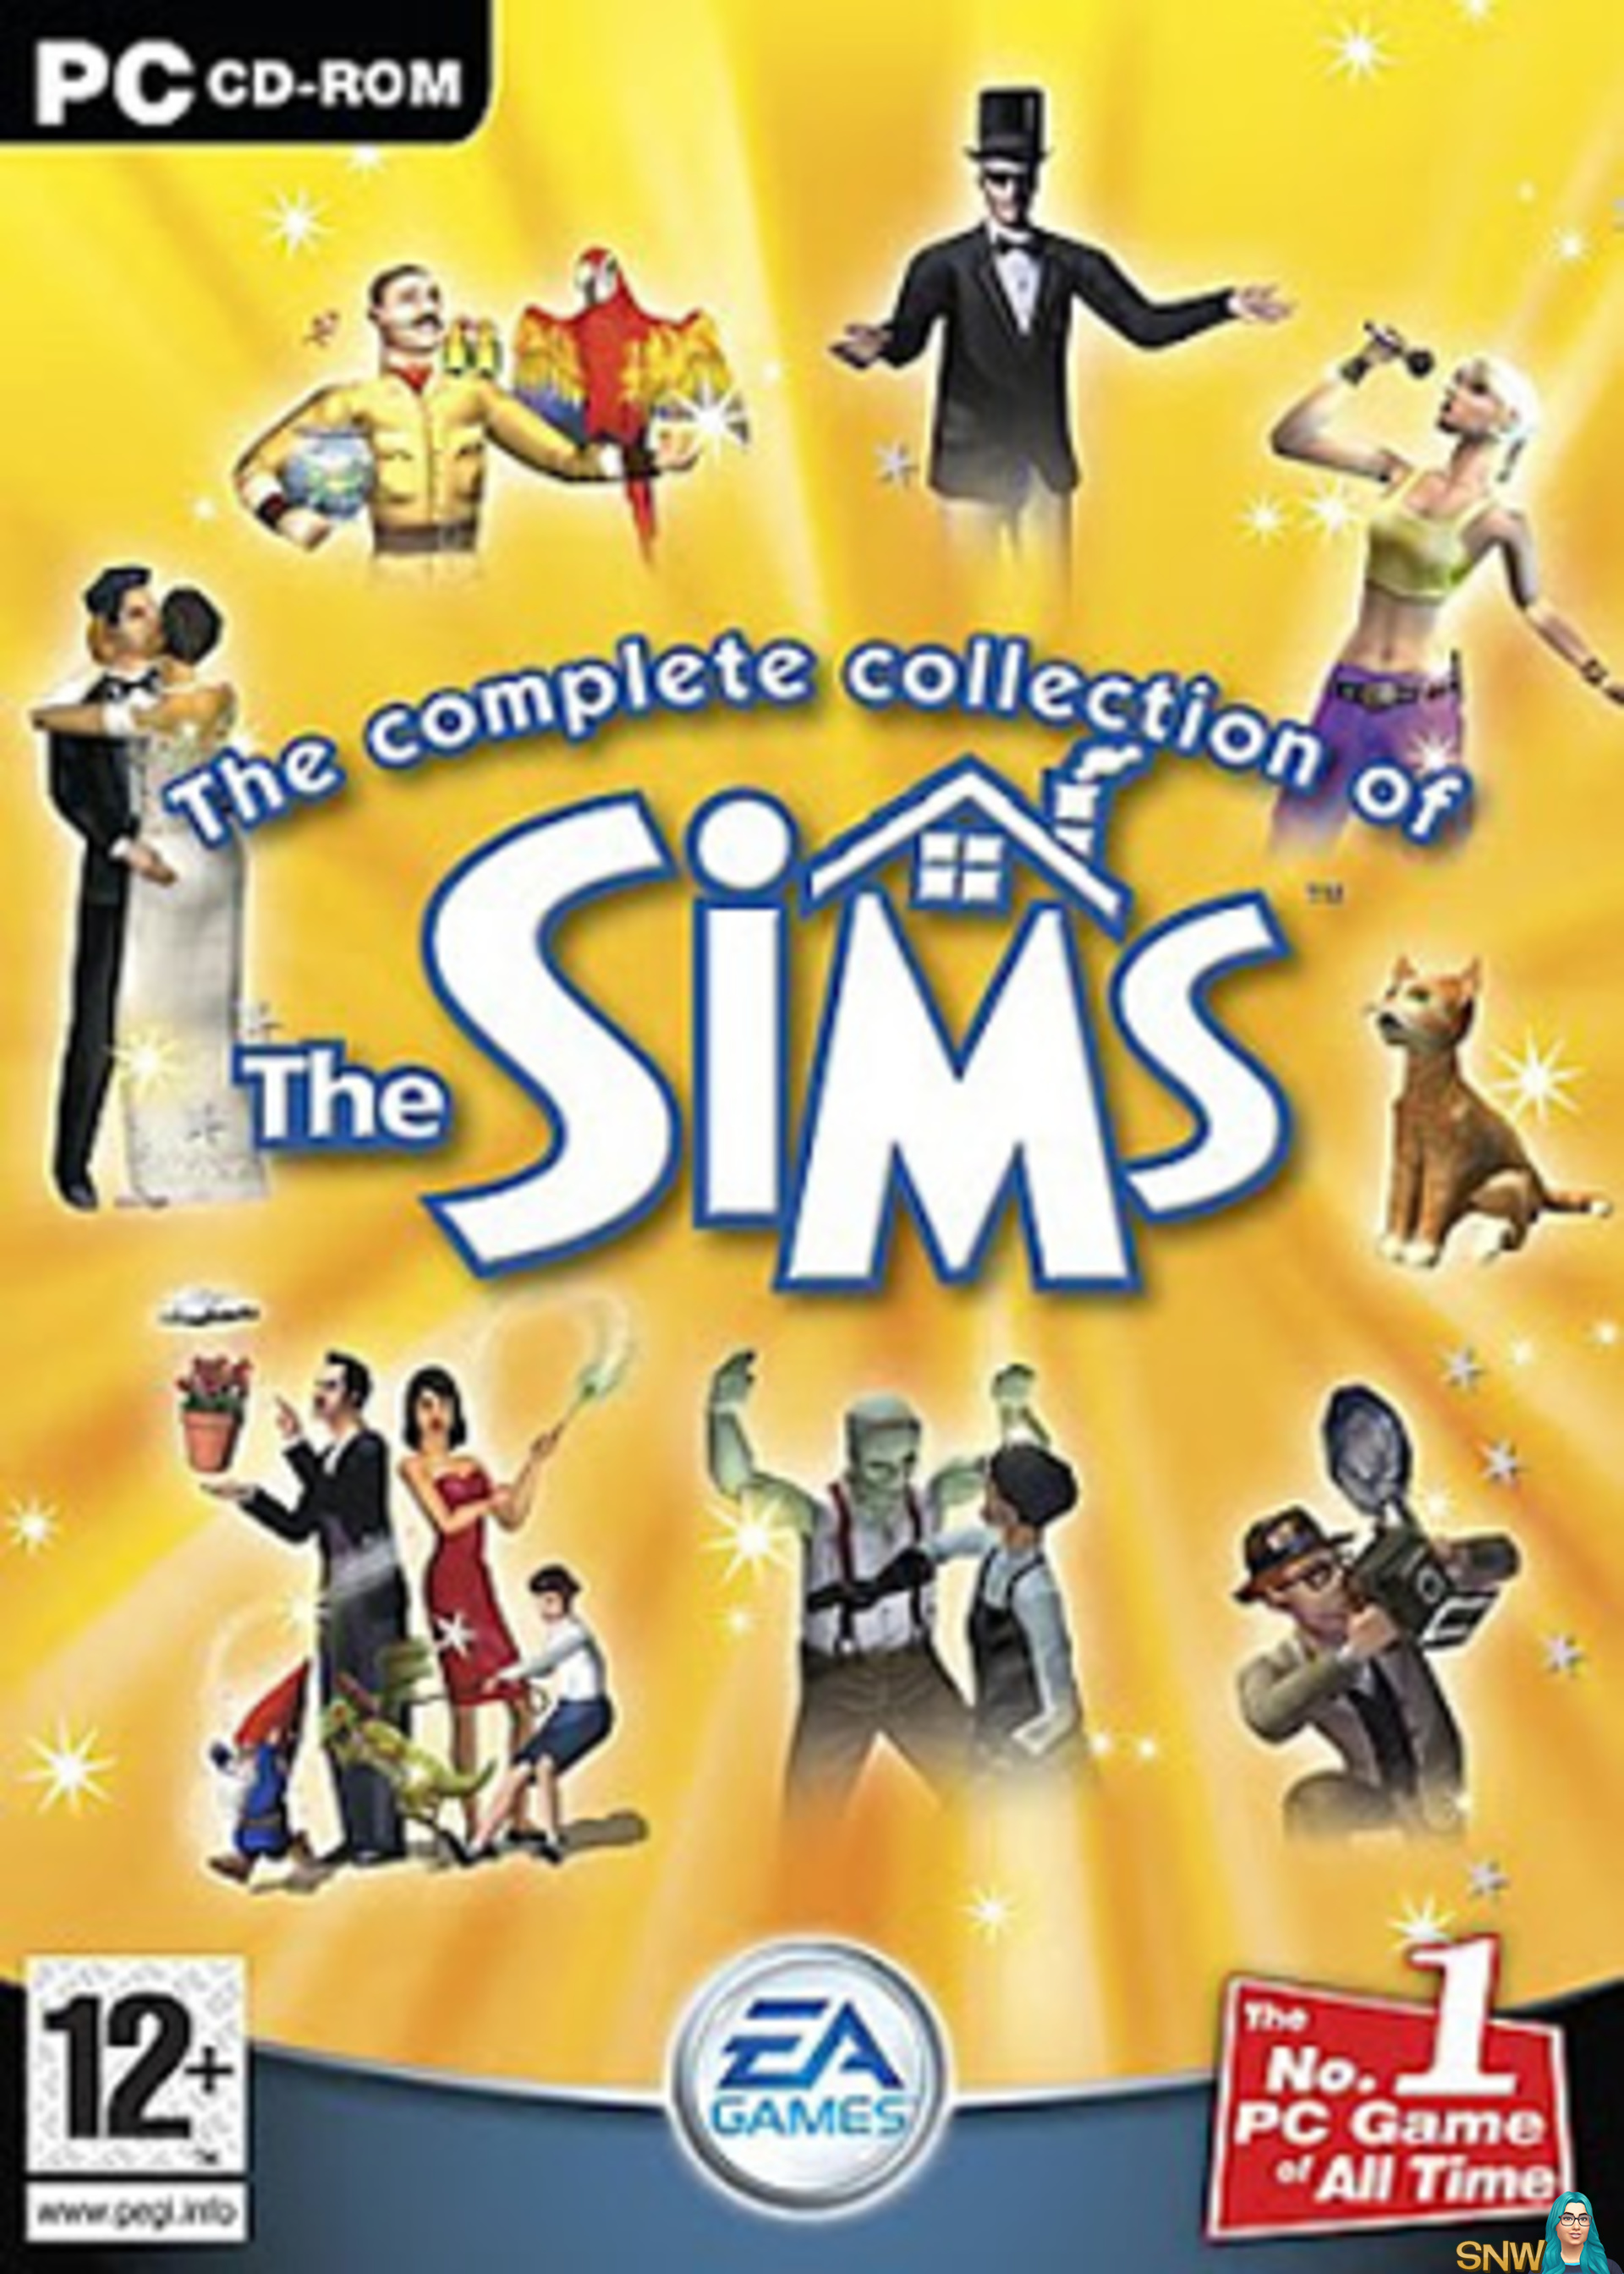 the sims 3 complete collection pc download